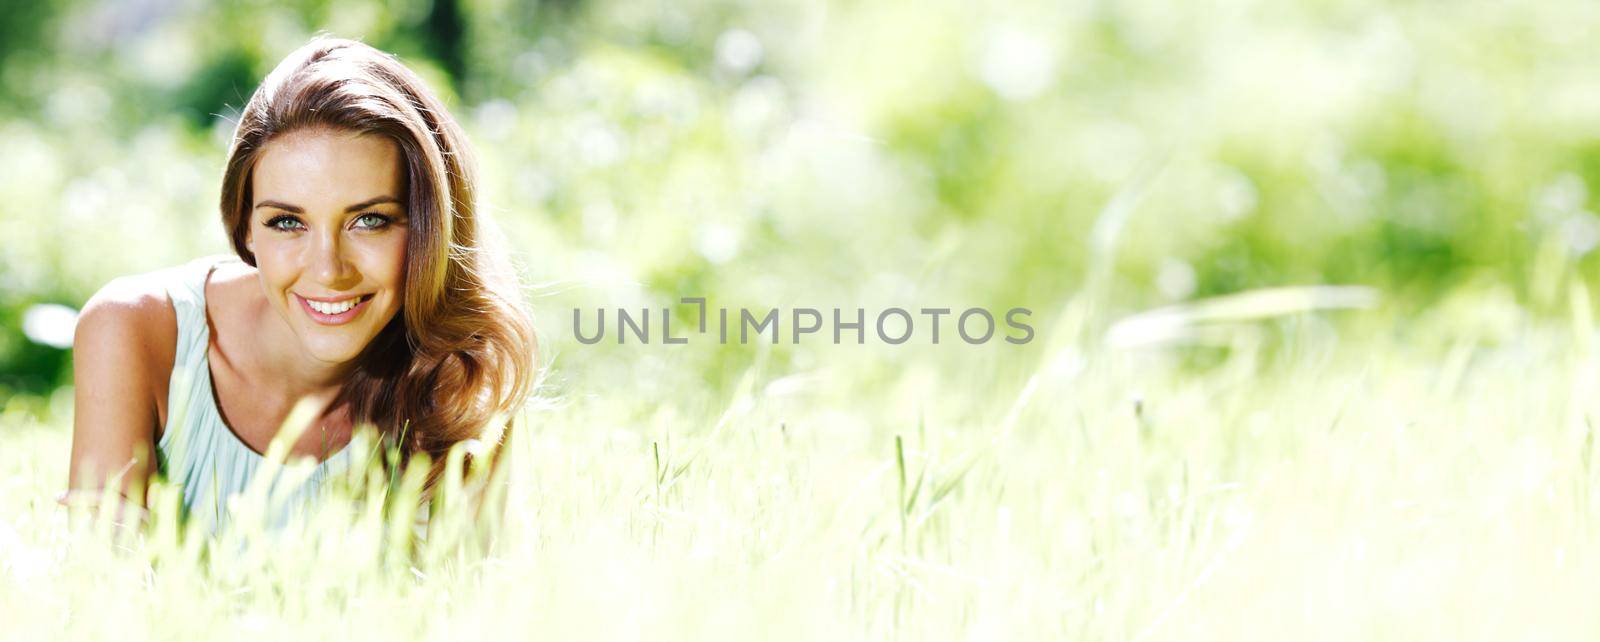 Portrait of attractive green eyes girl smiling in spring park nature background